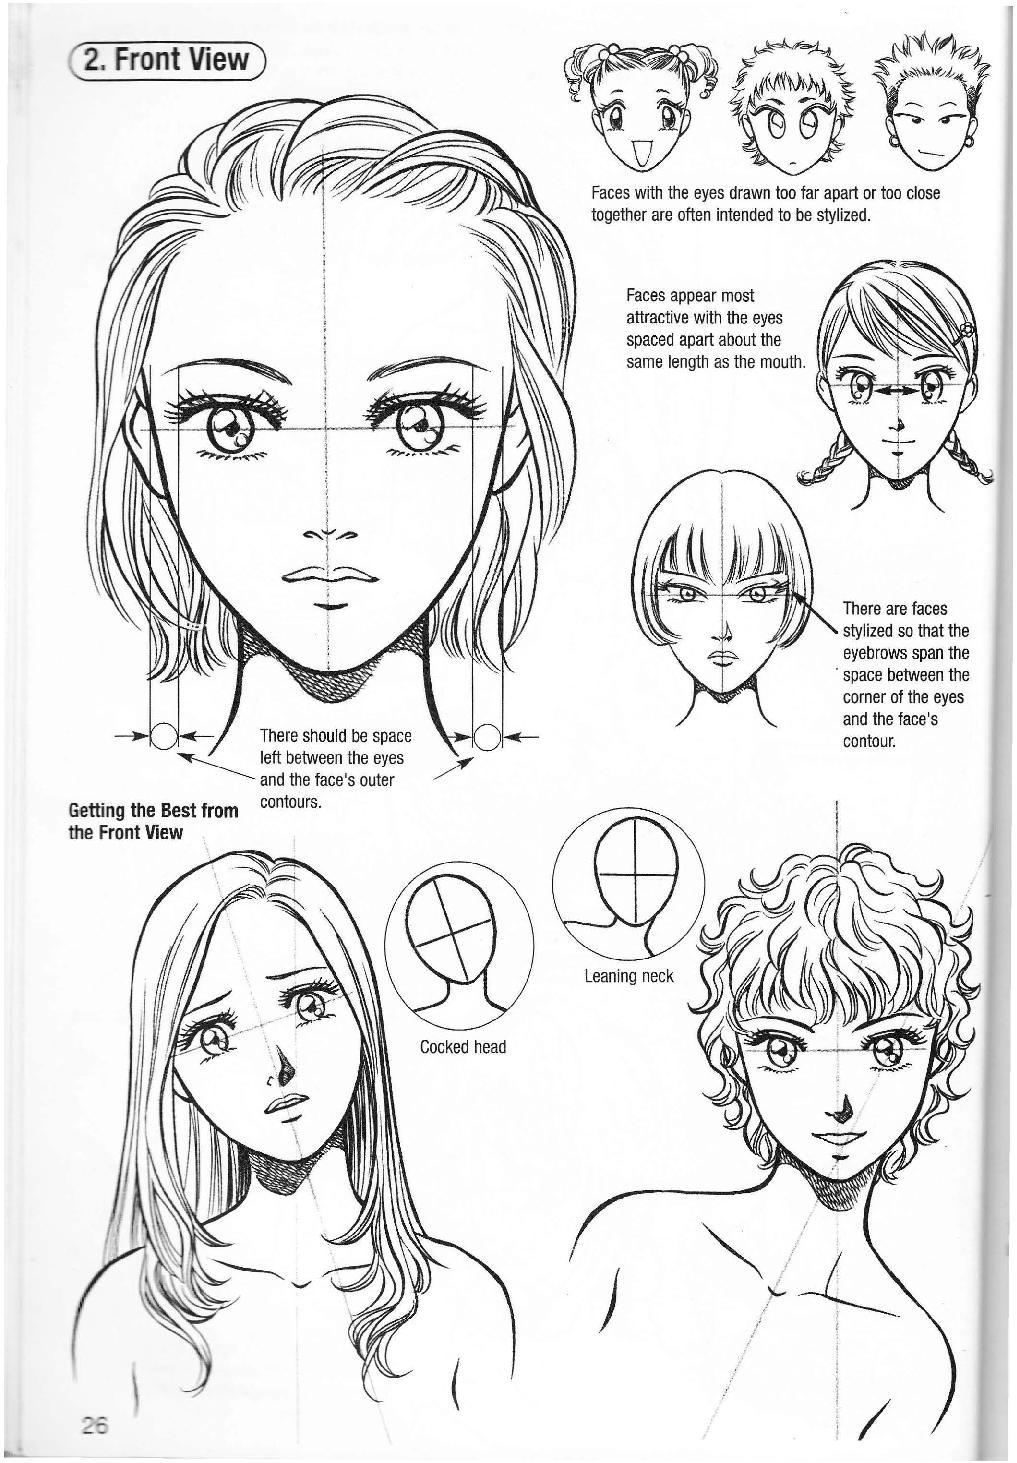 More How to Draw Manga Vol. 2 - Penning Characters 27